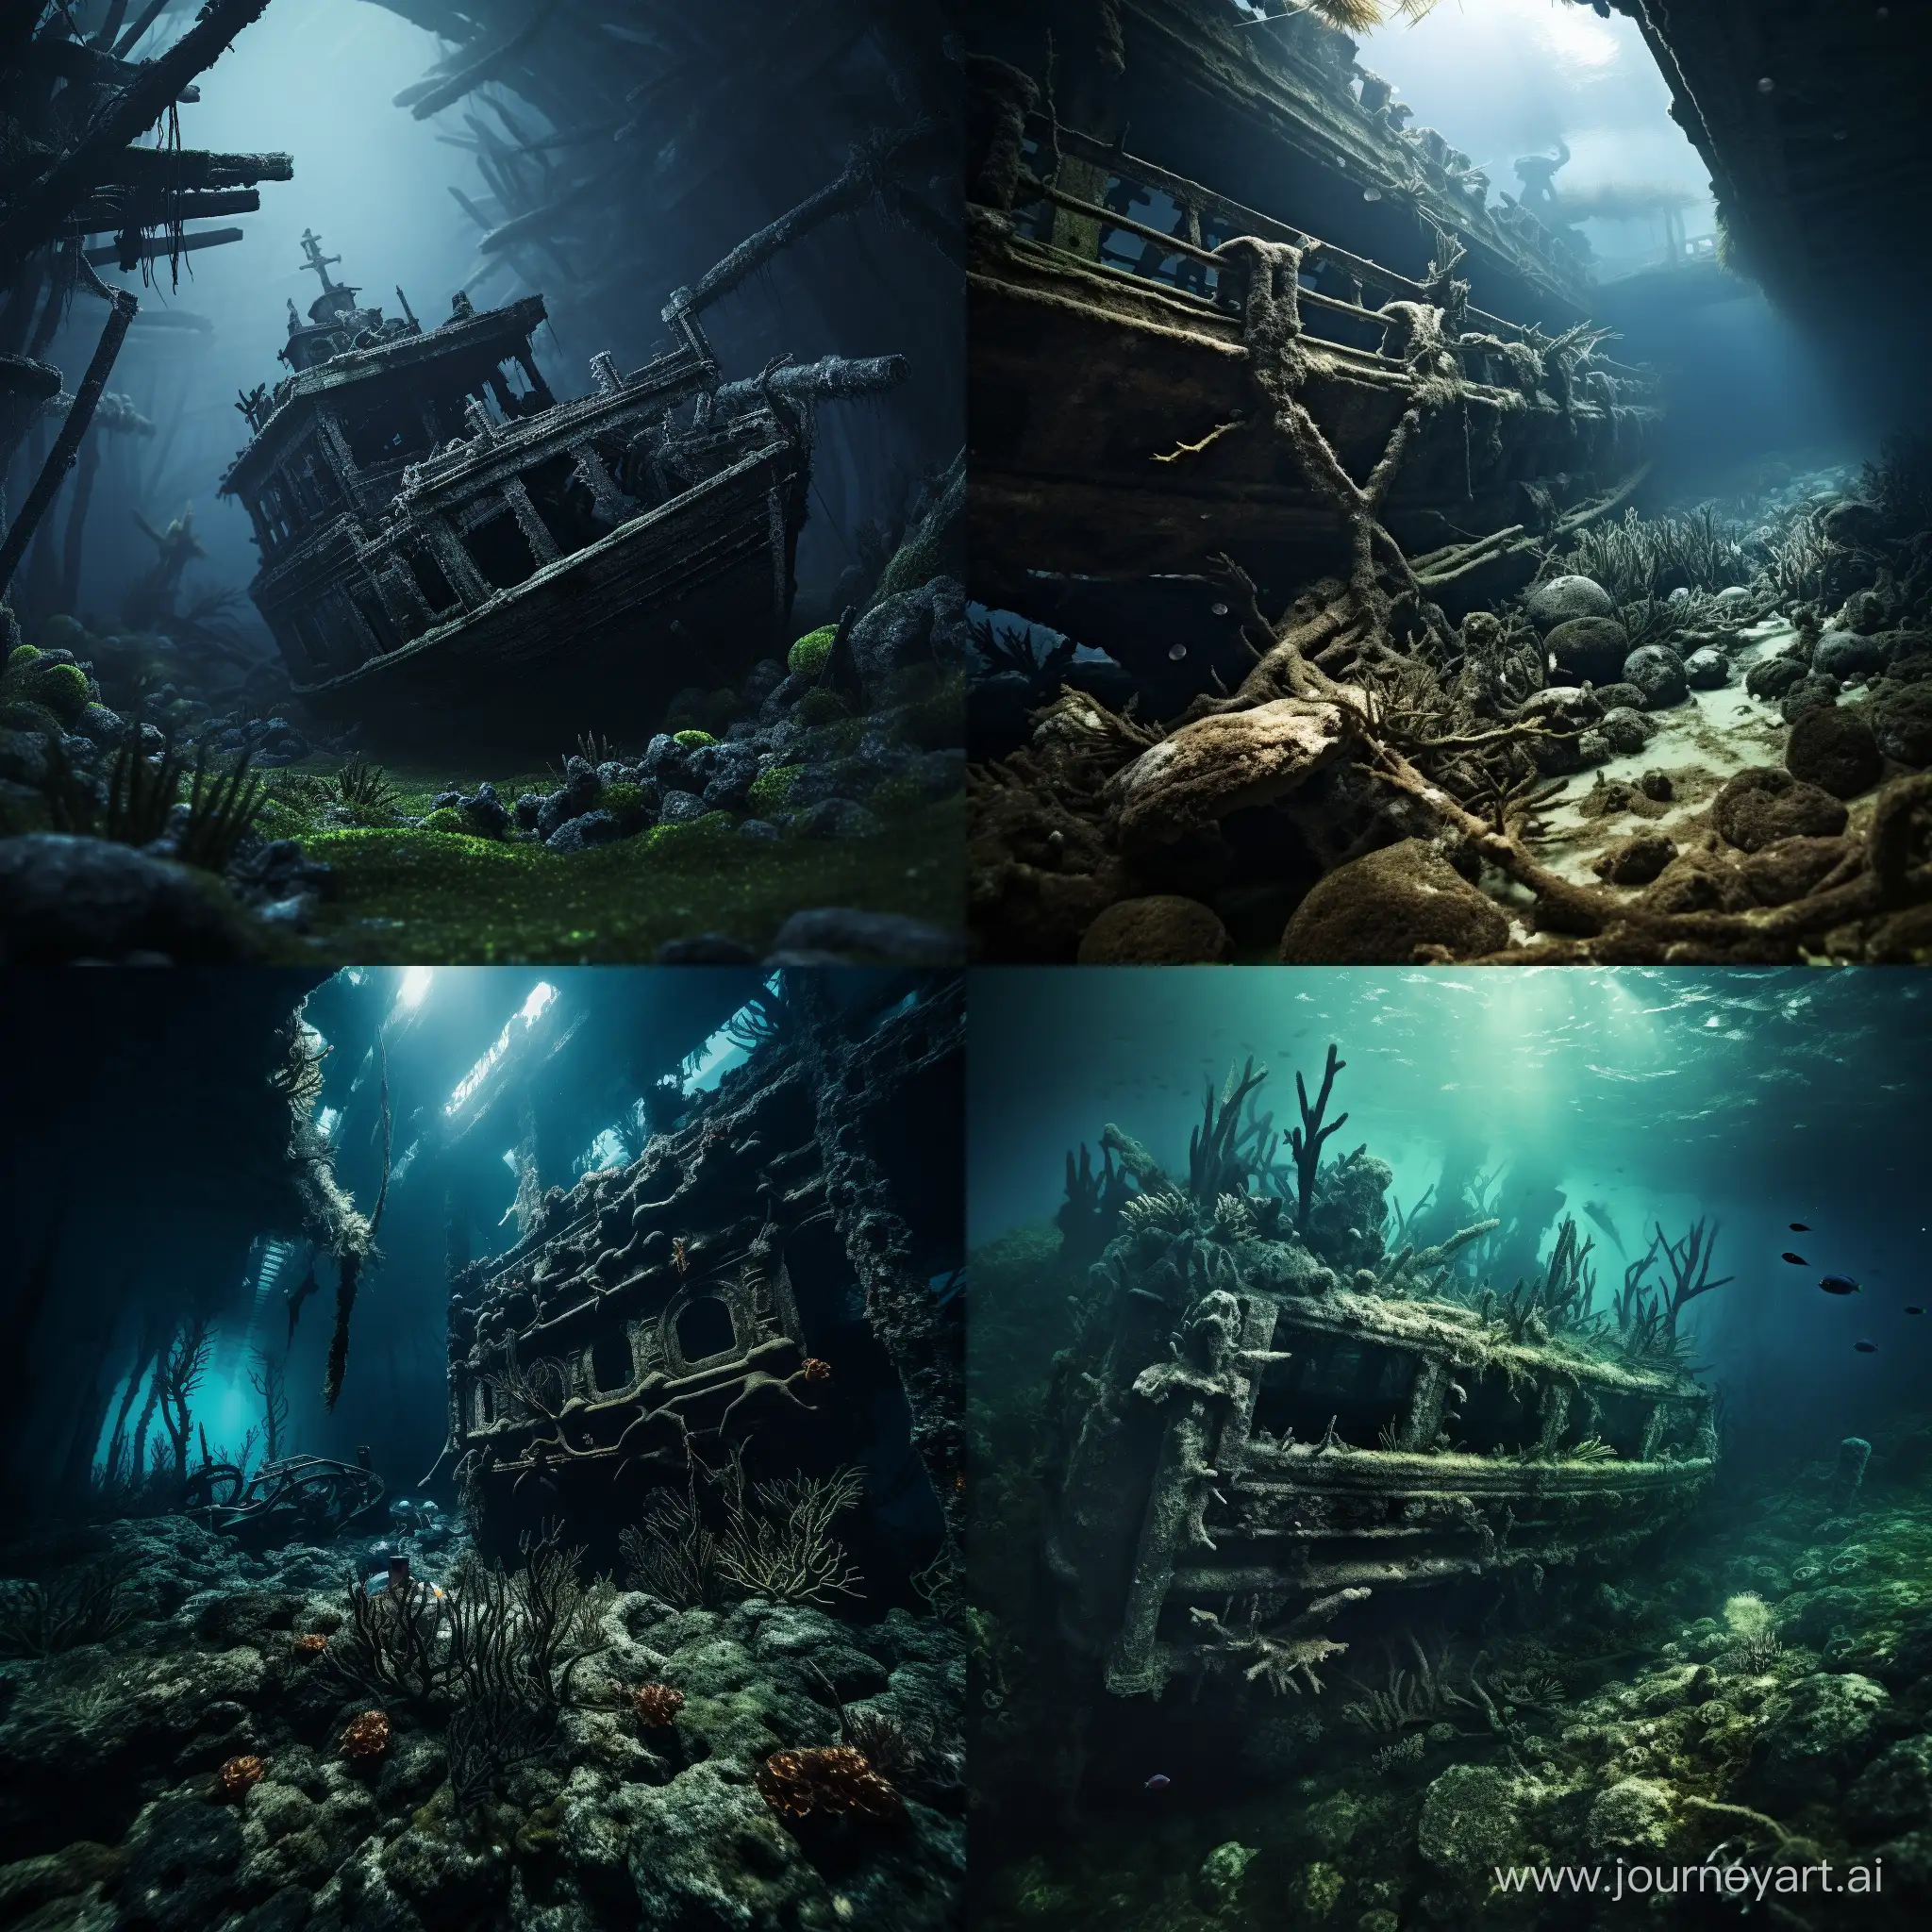 A photo of an ancient shipwreck nestled on the ocean floor. marine plants have claimed the wooden structure, and fish swim in and out of its hollow spaces. Sunken treasures and old cannons are scattered around, providing a glimpse into the past. H.R.Giger style, dark and gloomy